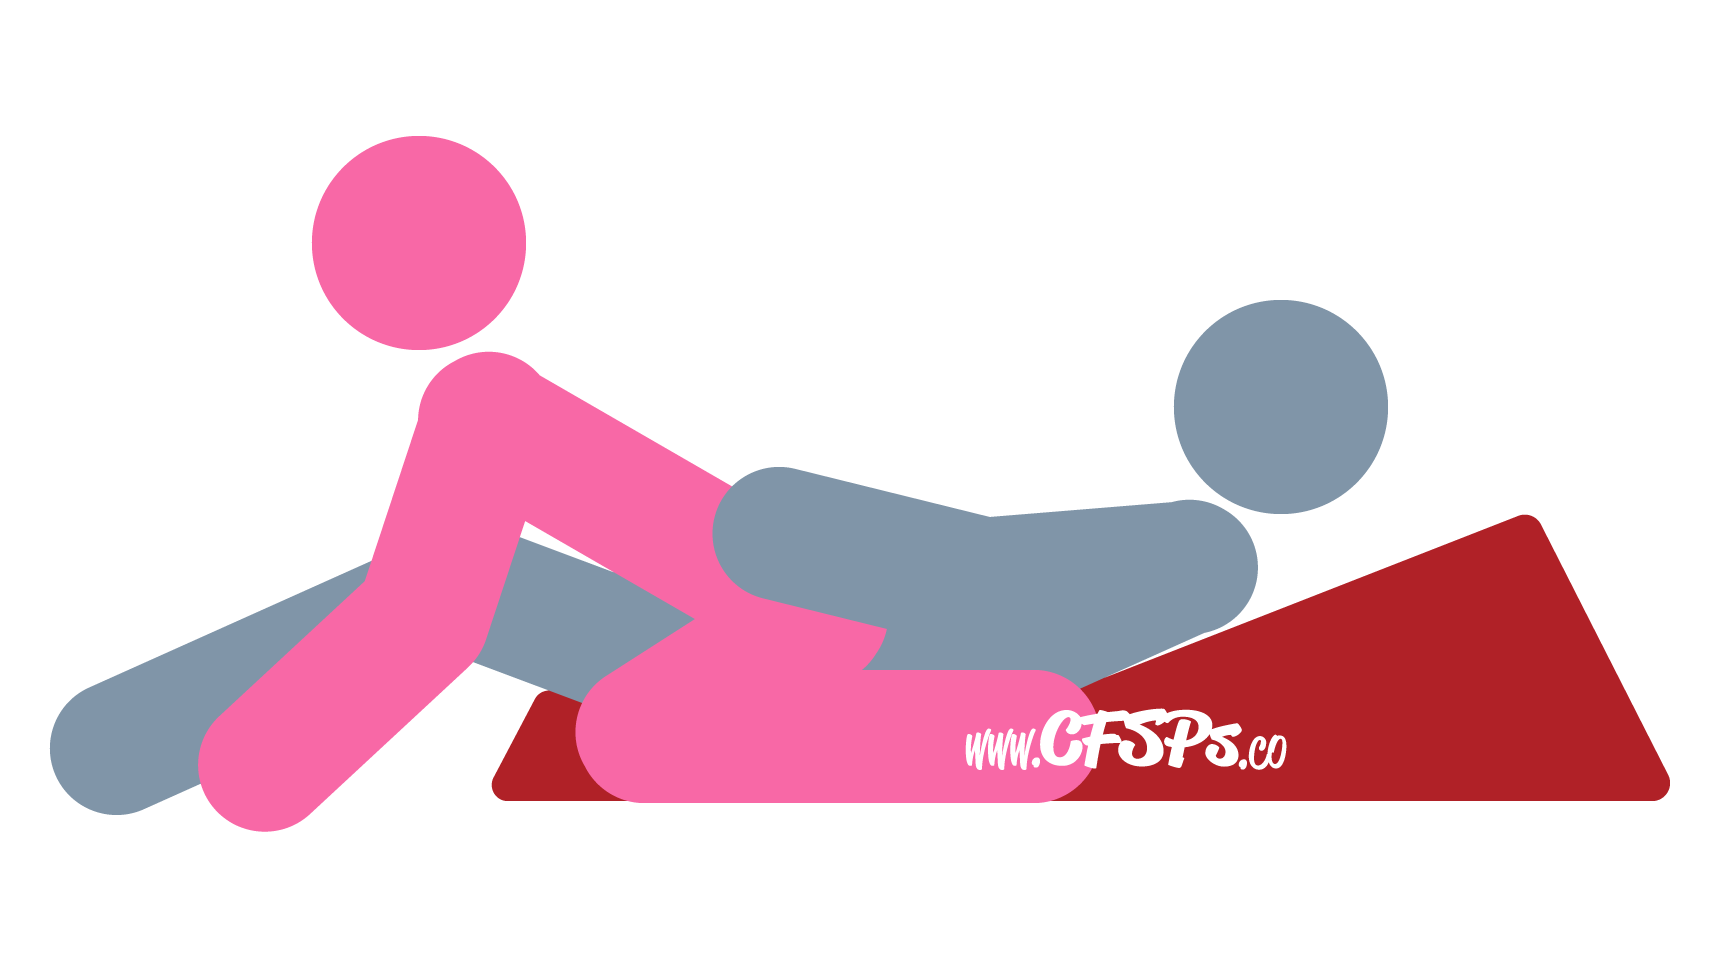 This stick figure image depicts a man and woman having sex using a Liberator Wedge Ramp in the Lustful Cobra sex position. The man is lying on his back with the ramp sex pillow under his back and his legs draped over the wedge. The woman is straddling the man's pelvis while facing away from him and supporting her upper body with her hands on the bed or his knees.